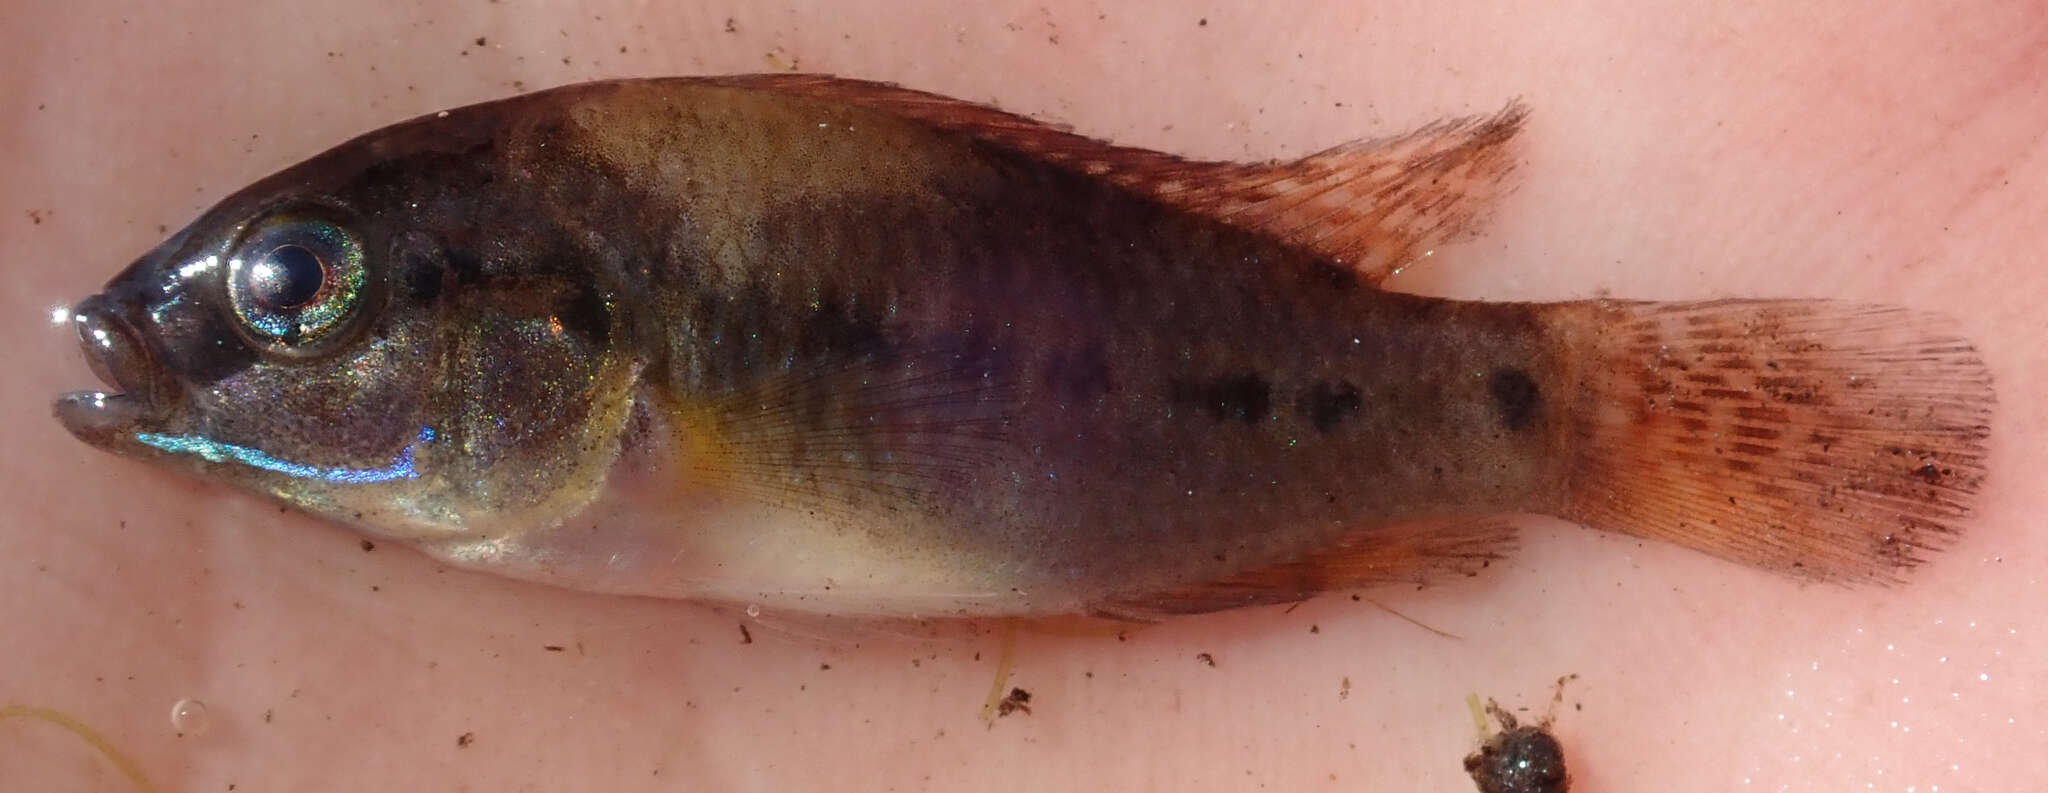 Image of Southern mouthbrooder